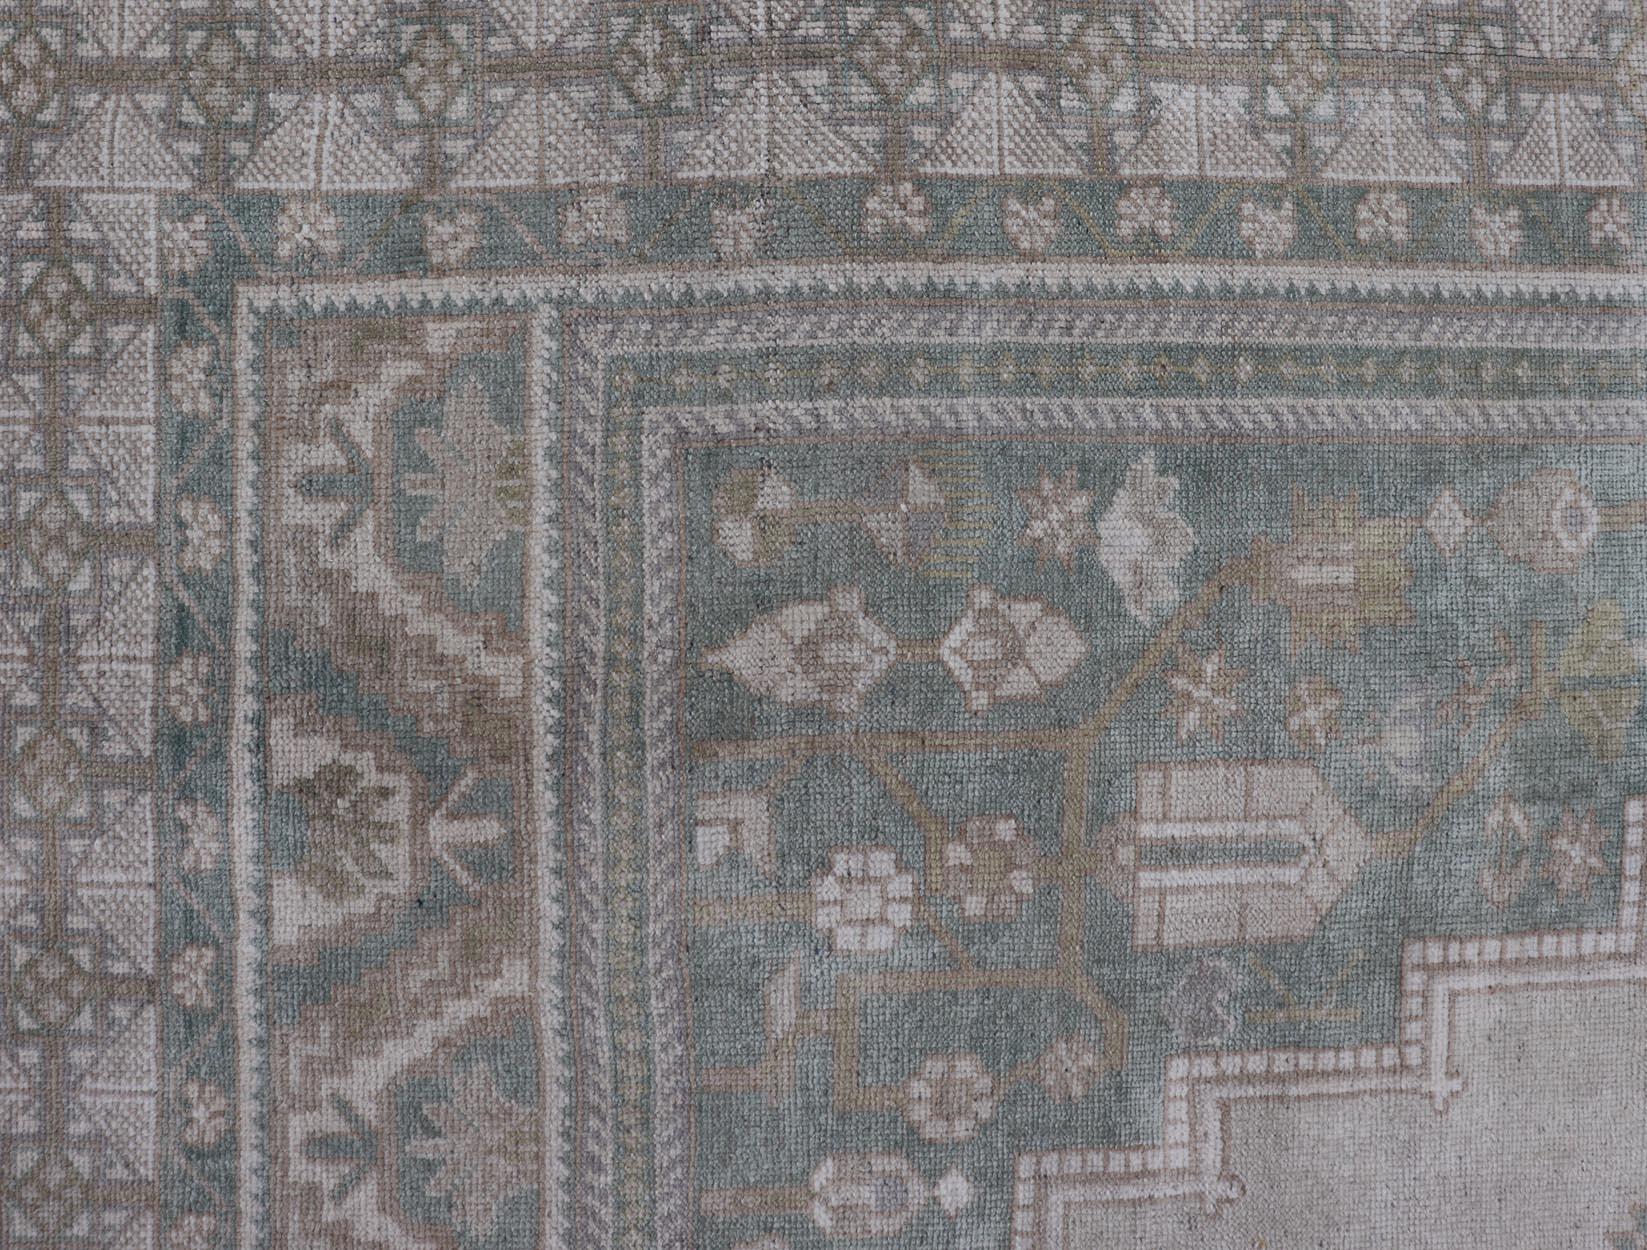 Measures: 6'4 x 11'9 
Turkish Vintage Oushak Rug With Medallion in Muted Light Green and Cream. Keivan Woven Arts / rug TU-MTU-4665 country of origin / type: Turkey / circa 1940 

This vintage muted Turkish Oushak Rug has been hand-knotted in wool